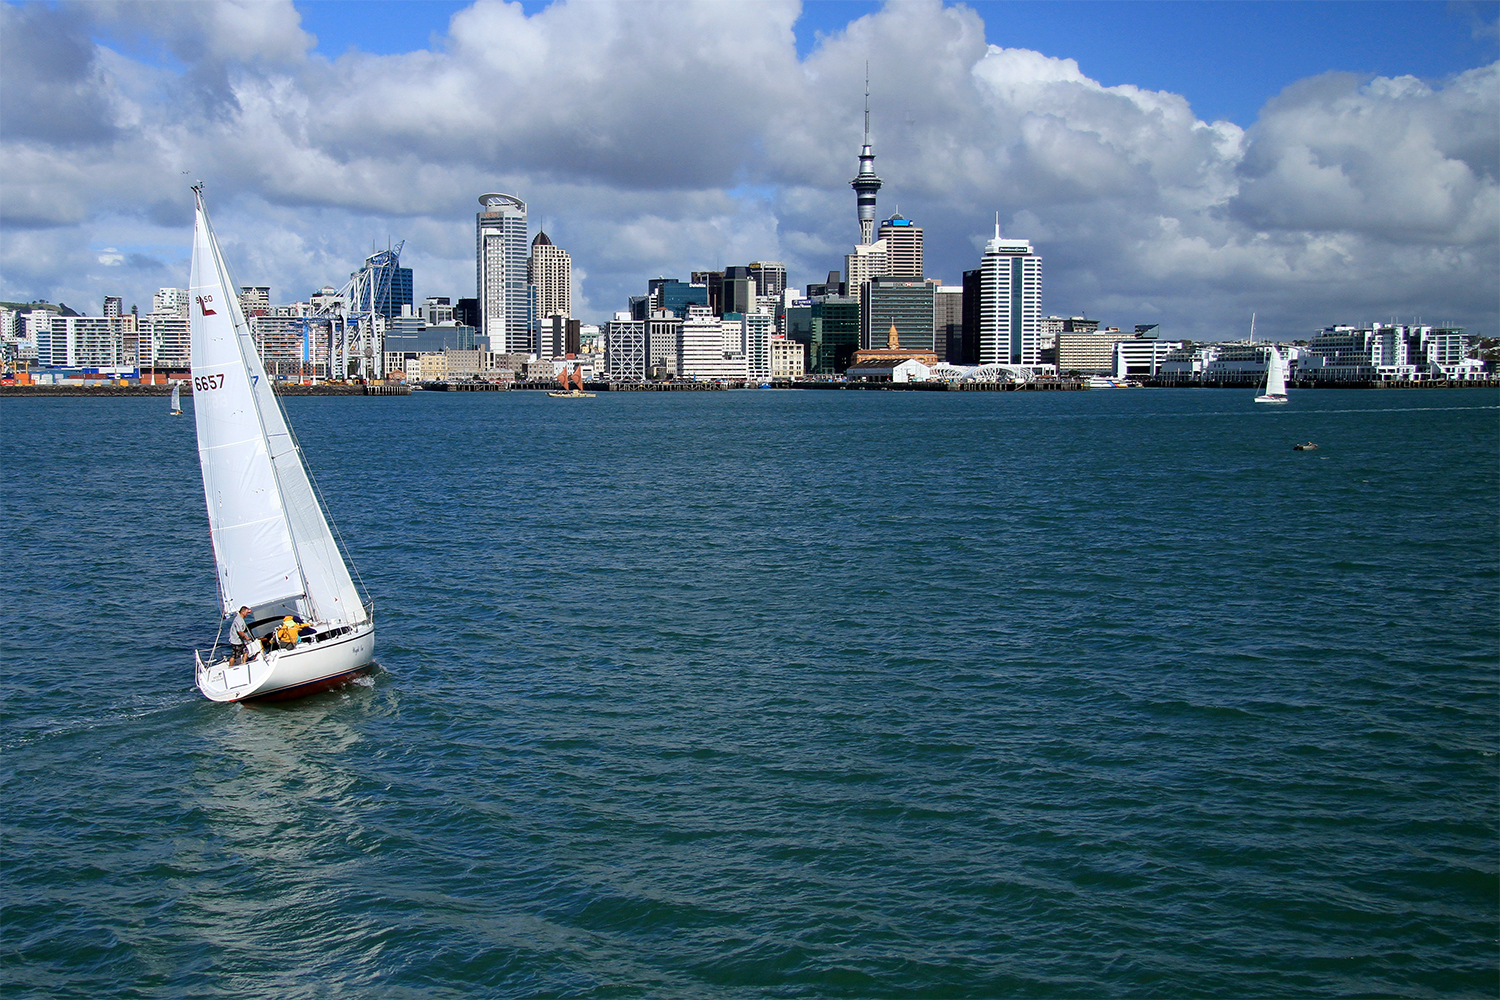 Don't know your starboard from your stern? Even beginners can have a go at sailing past the sparkling Auckland skyline. Image by Ronnie Macdonald / CC BY 2.0